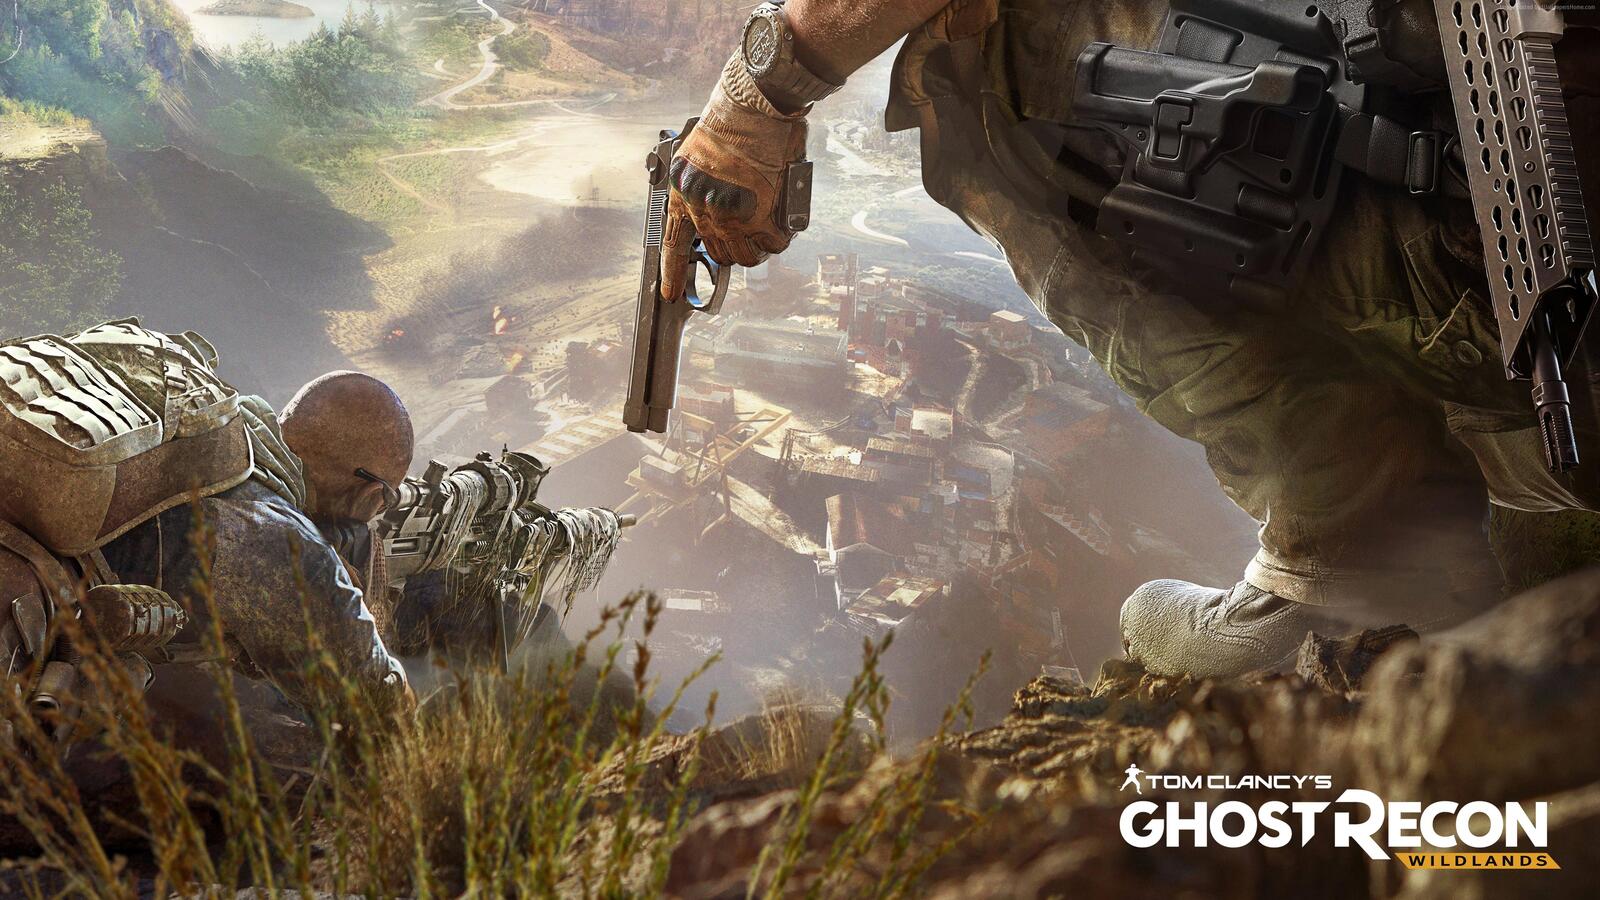 Free photo A beautiful screensaver from the game Tom Clancys Ghost Recon Wildlands